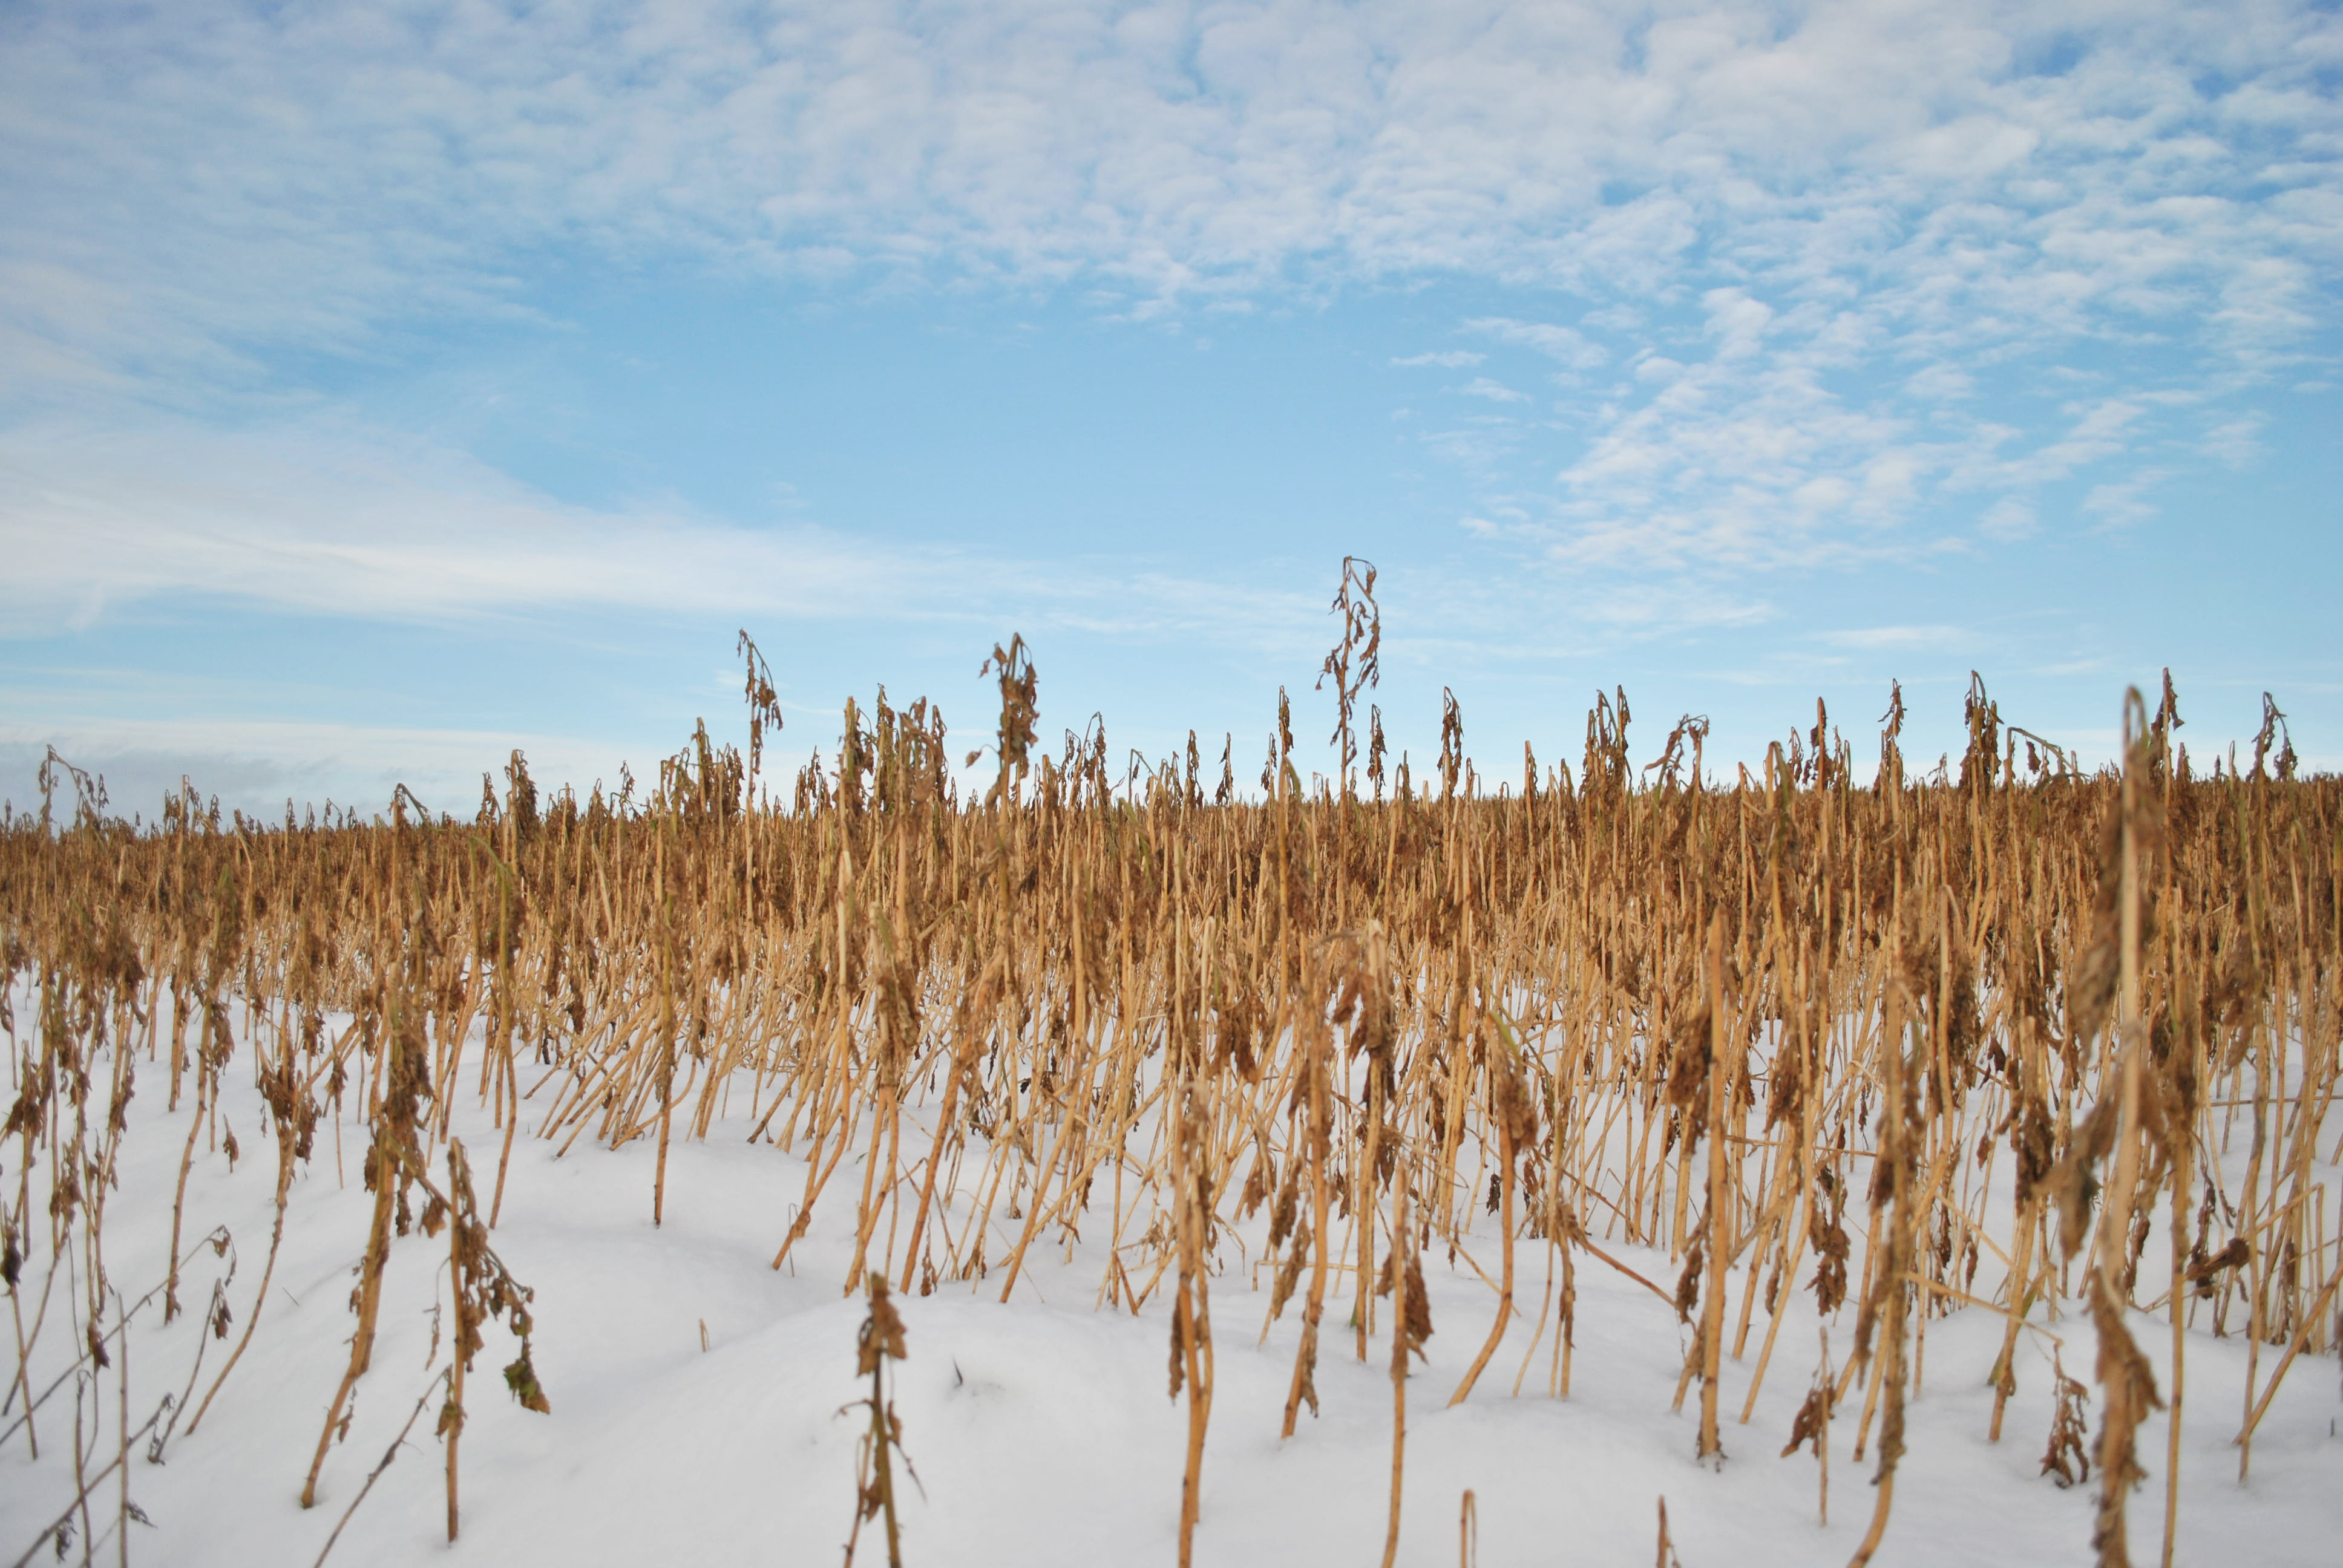 Cover crops left over winter in a field stick up above the snow.